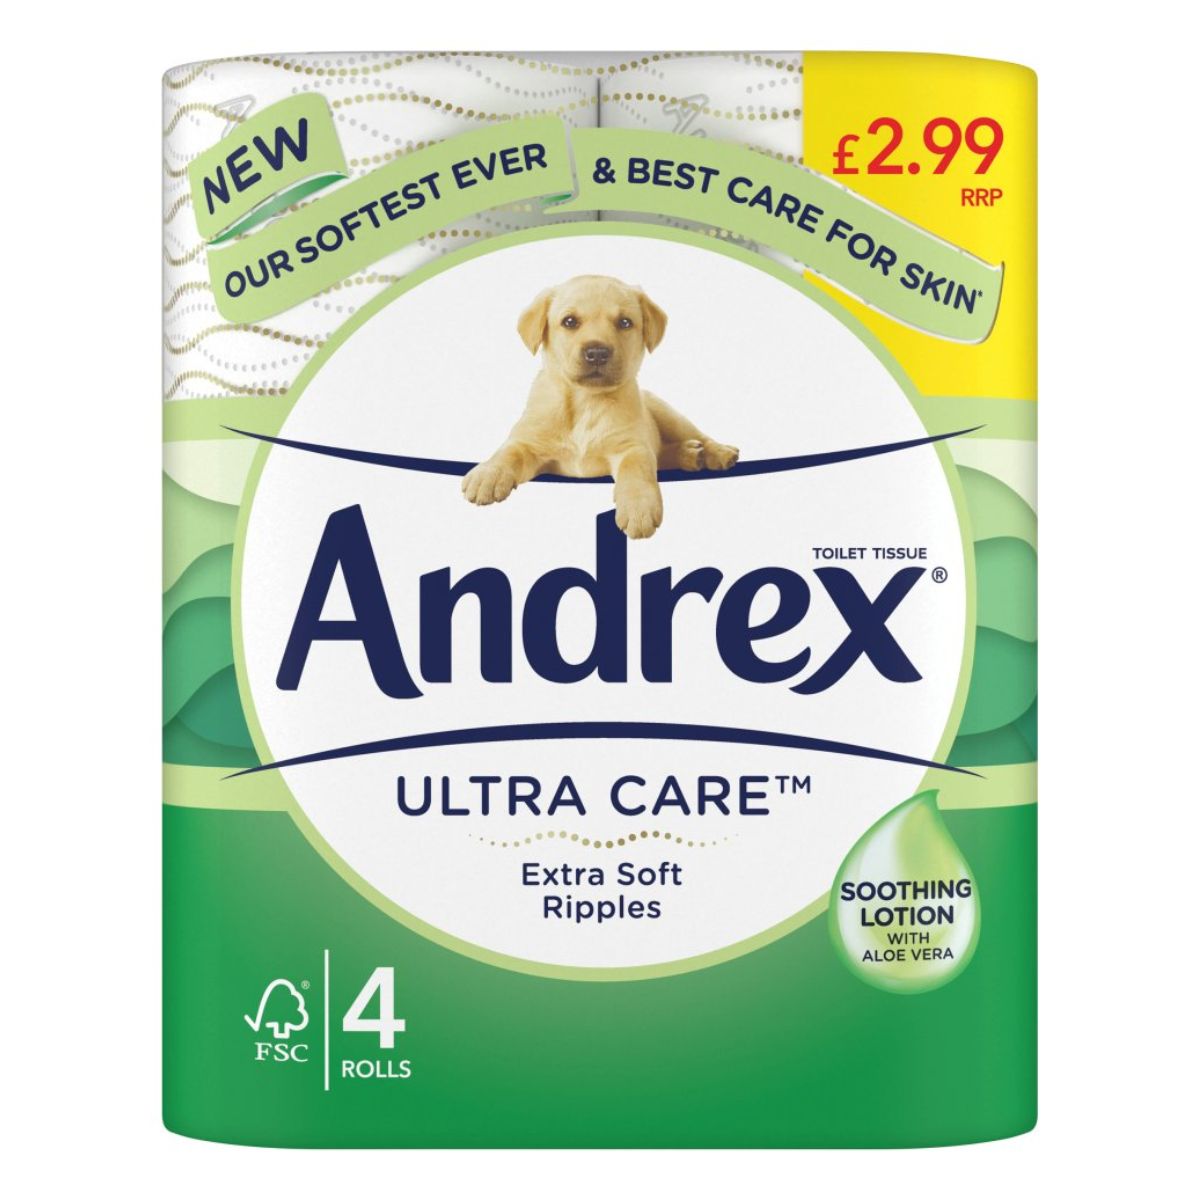 Andrex - Ultra Care Toilet Roll - 4pcs.